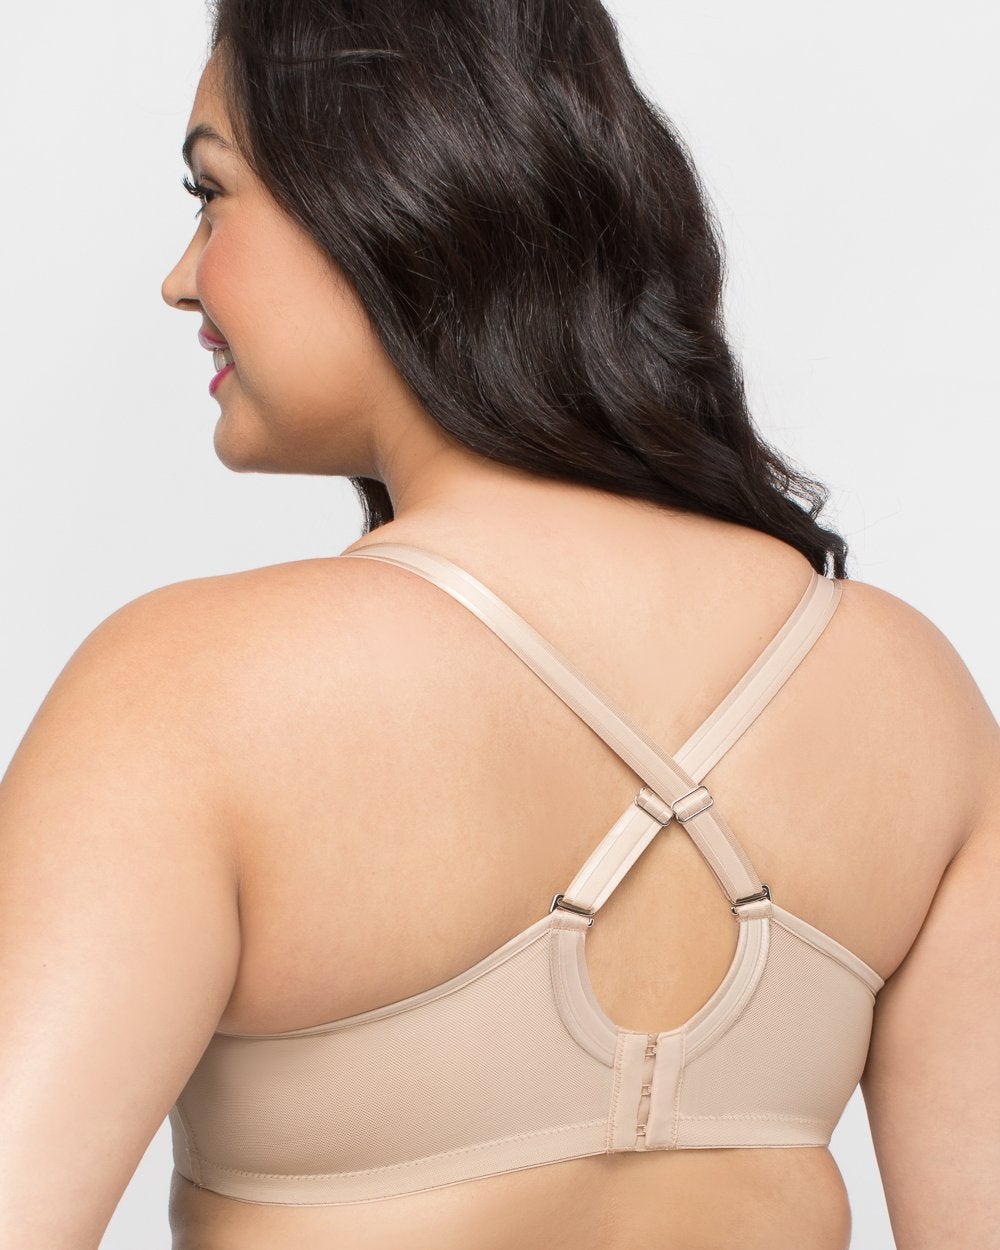 Curvy Couture Tulip – Bra Fittings by Court